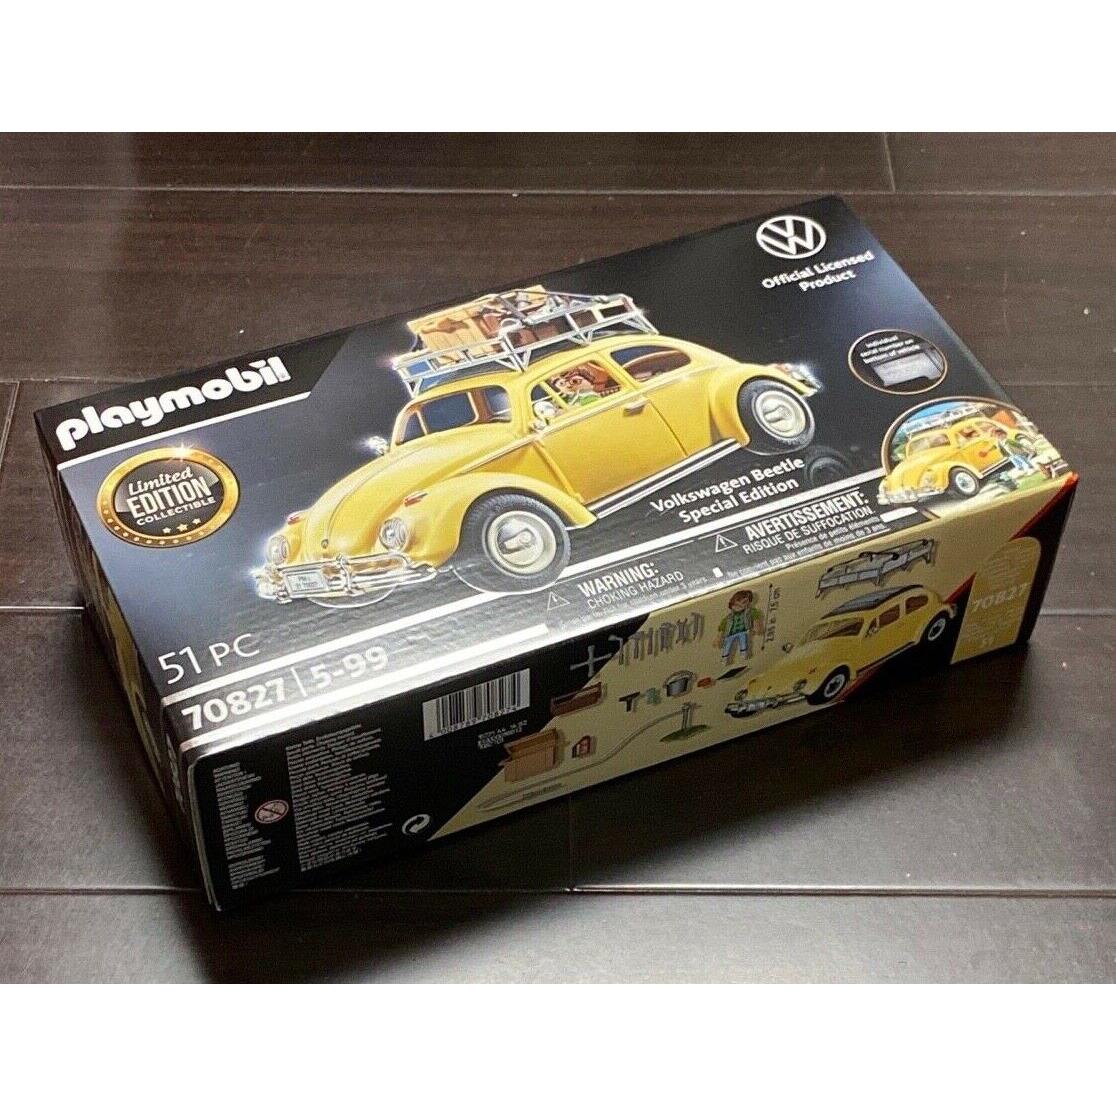 PLM70827: Playmobil 70827 Volkswagen Beetle Limited Edition